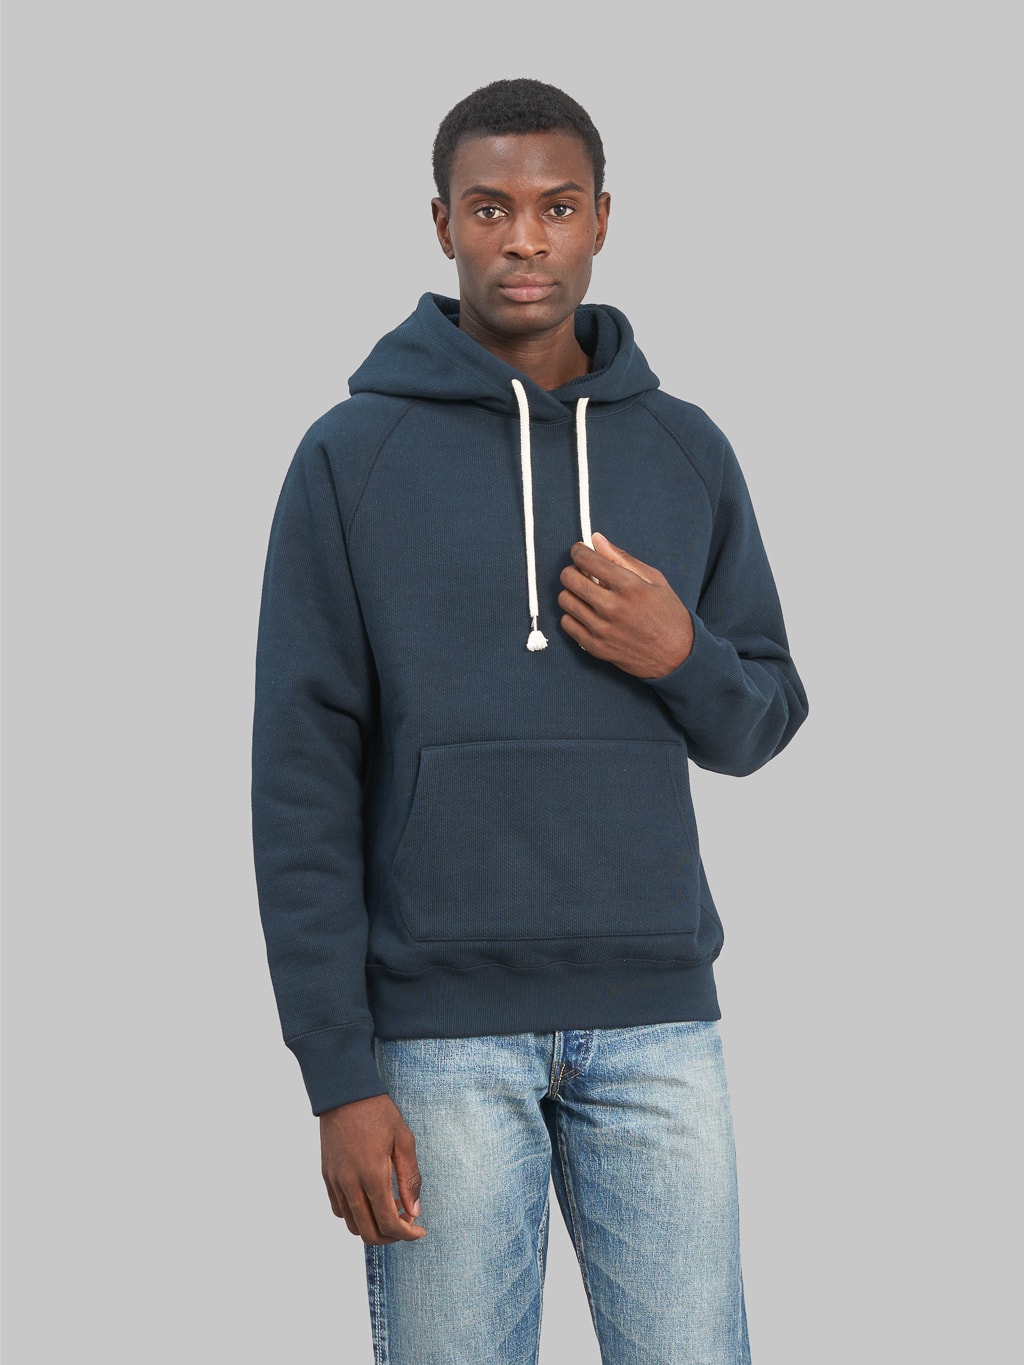 Wonder Looper Pullover Hoodie 701gsm Double Heavyweight French Terry N